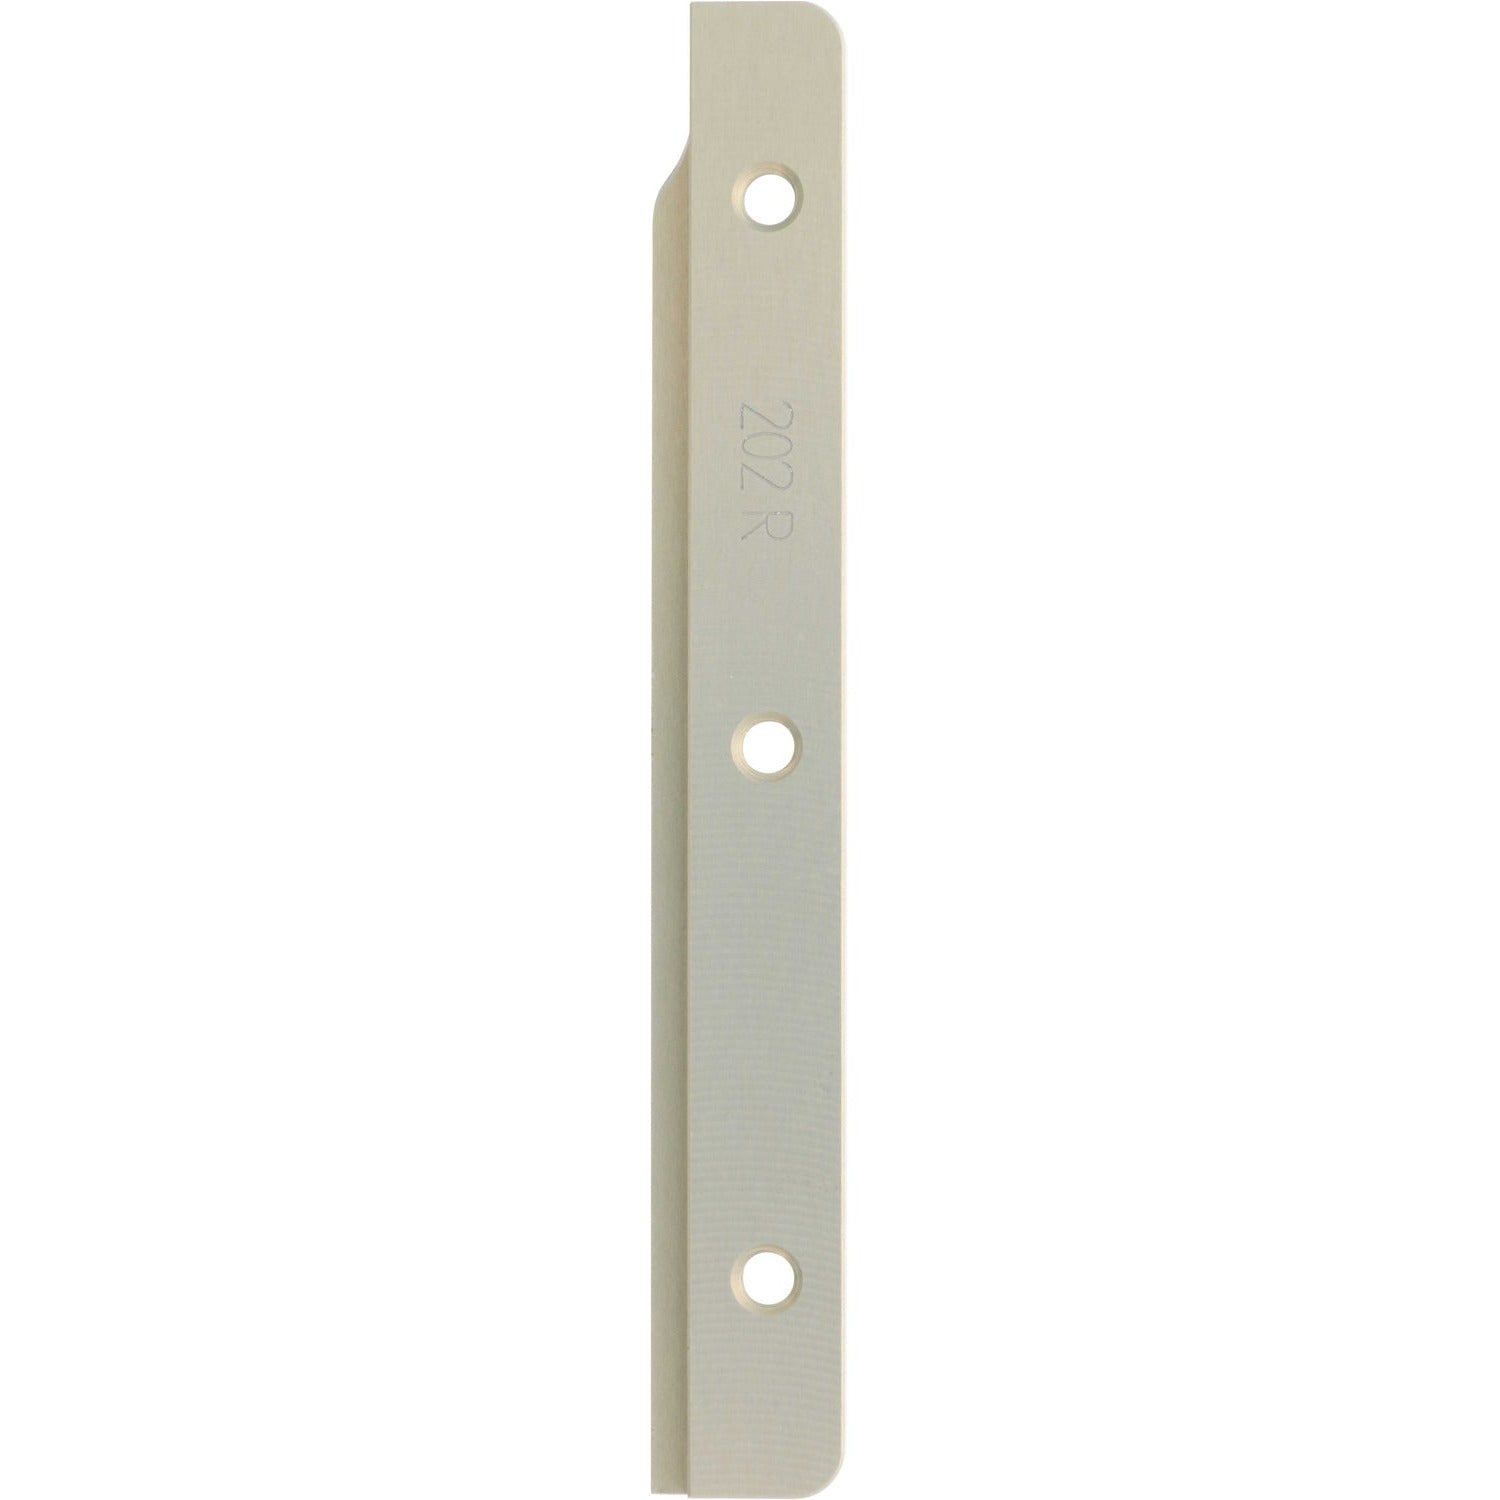 Machined blade like part made of hard anodized aluminum on white background. The part has three threaded holes and 202R machined onto it's surface. 